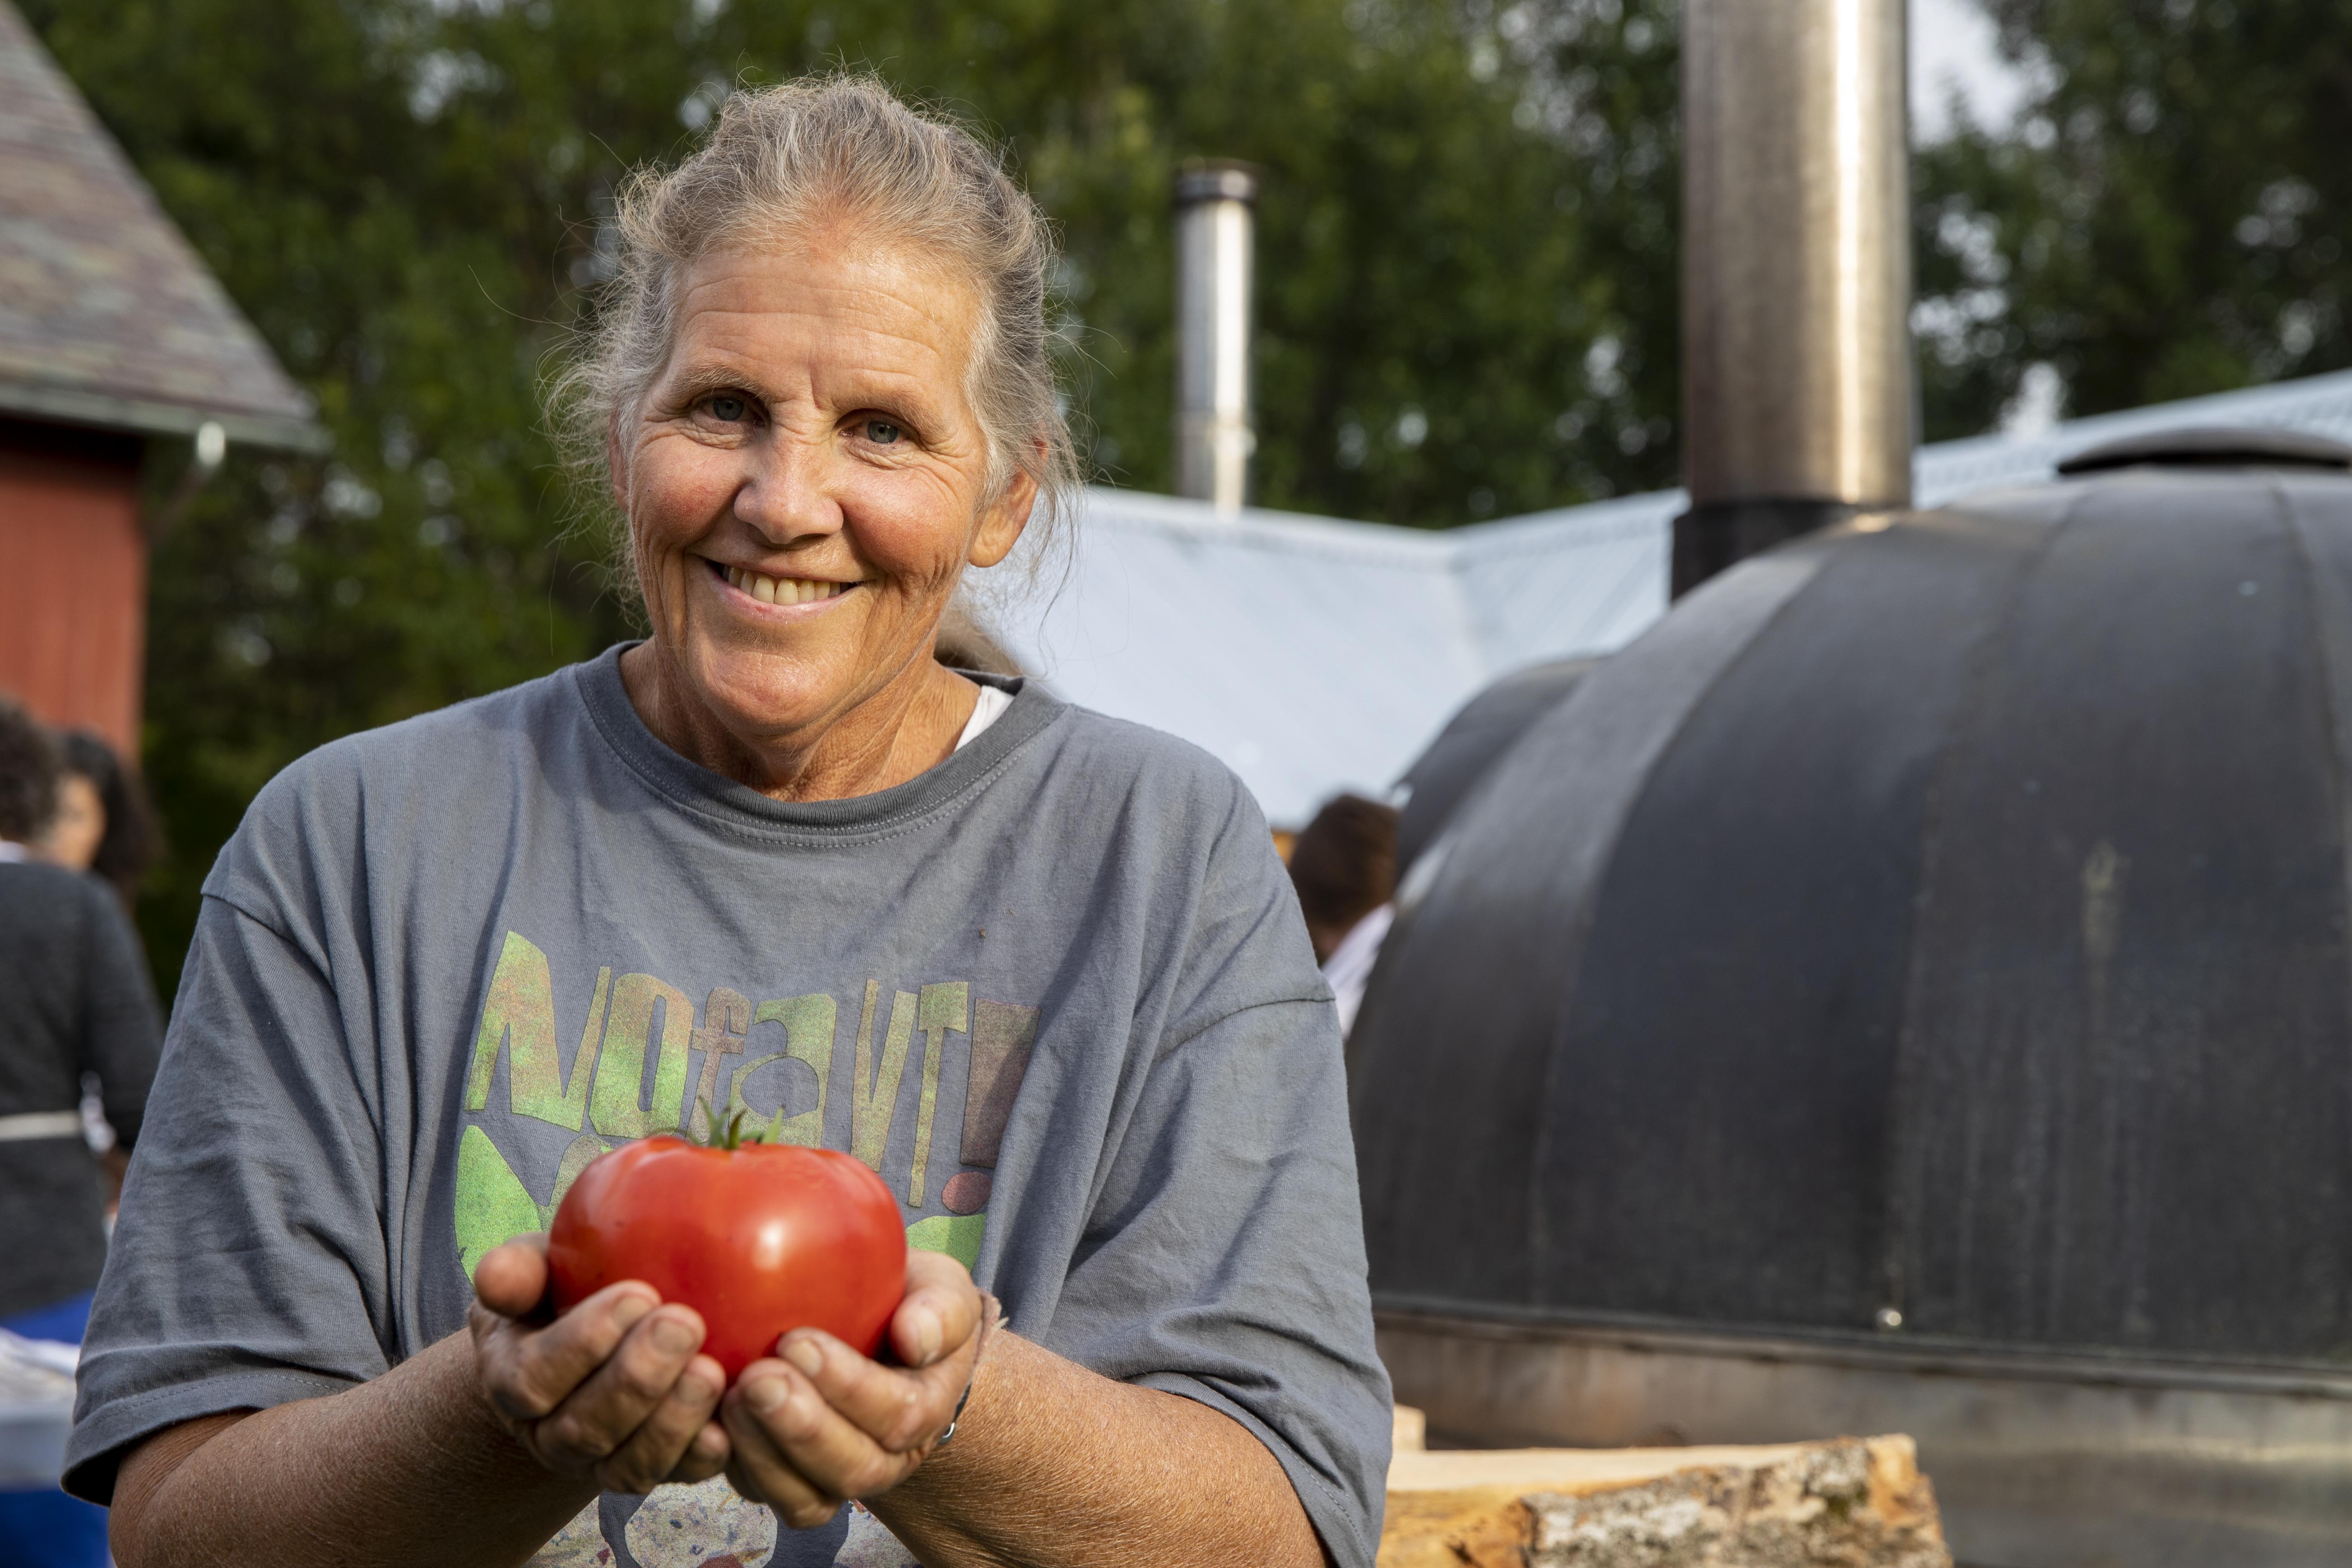 Enid Wonnacott stands outside in a NOFA-VT tee-shirt holding a tomato out to the camera and smiling. A woodfire pizza oven is in the background.